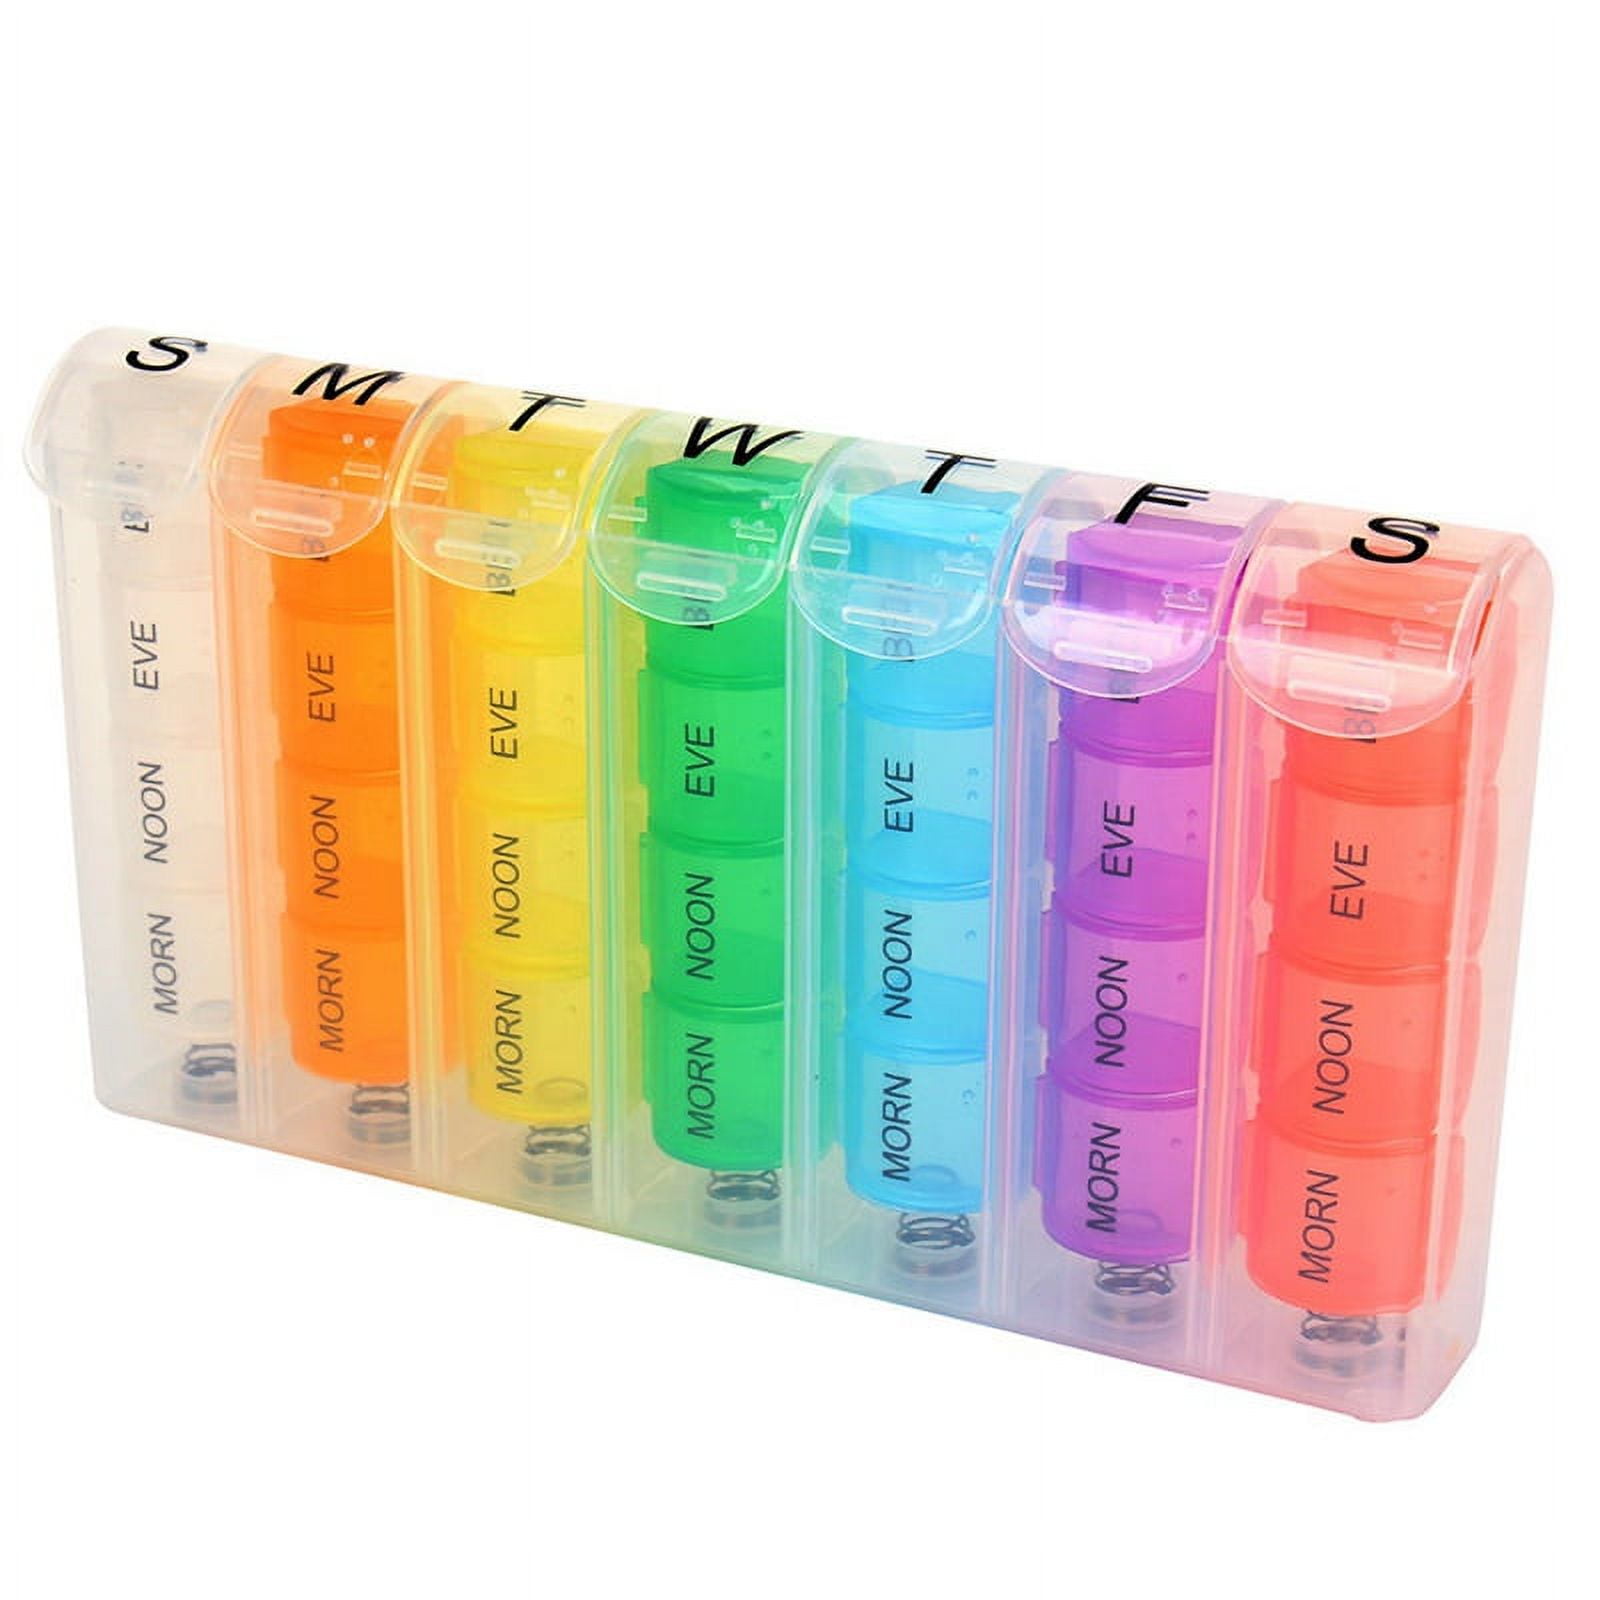 28/56 Grids Pill Box Holder Medicine Box Organizer Storage Case Container  Case Pill Box Splitters Jewelry Storage - Price history & Review, AliExpress Seller - JOCESTYLE Official Store